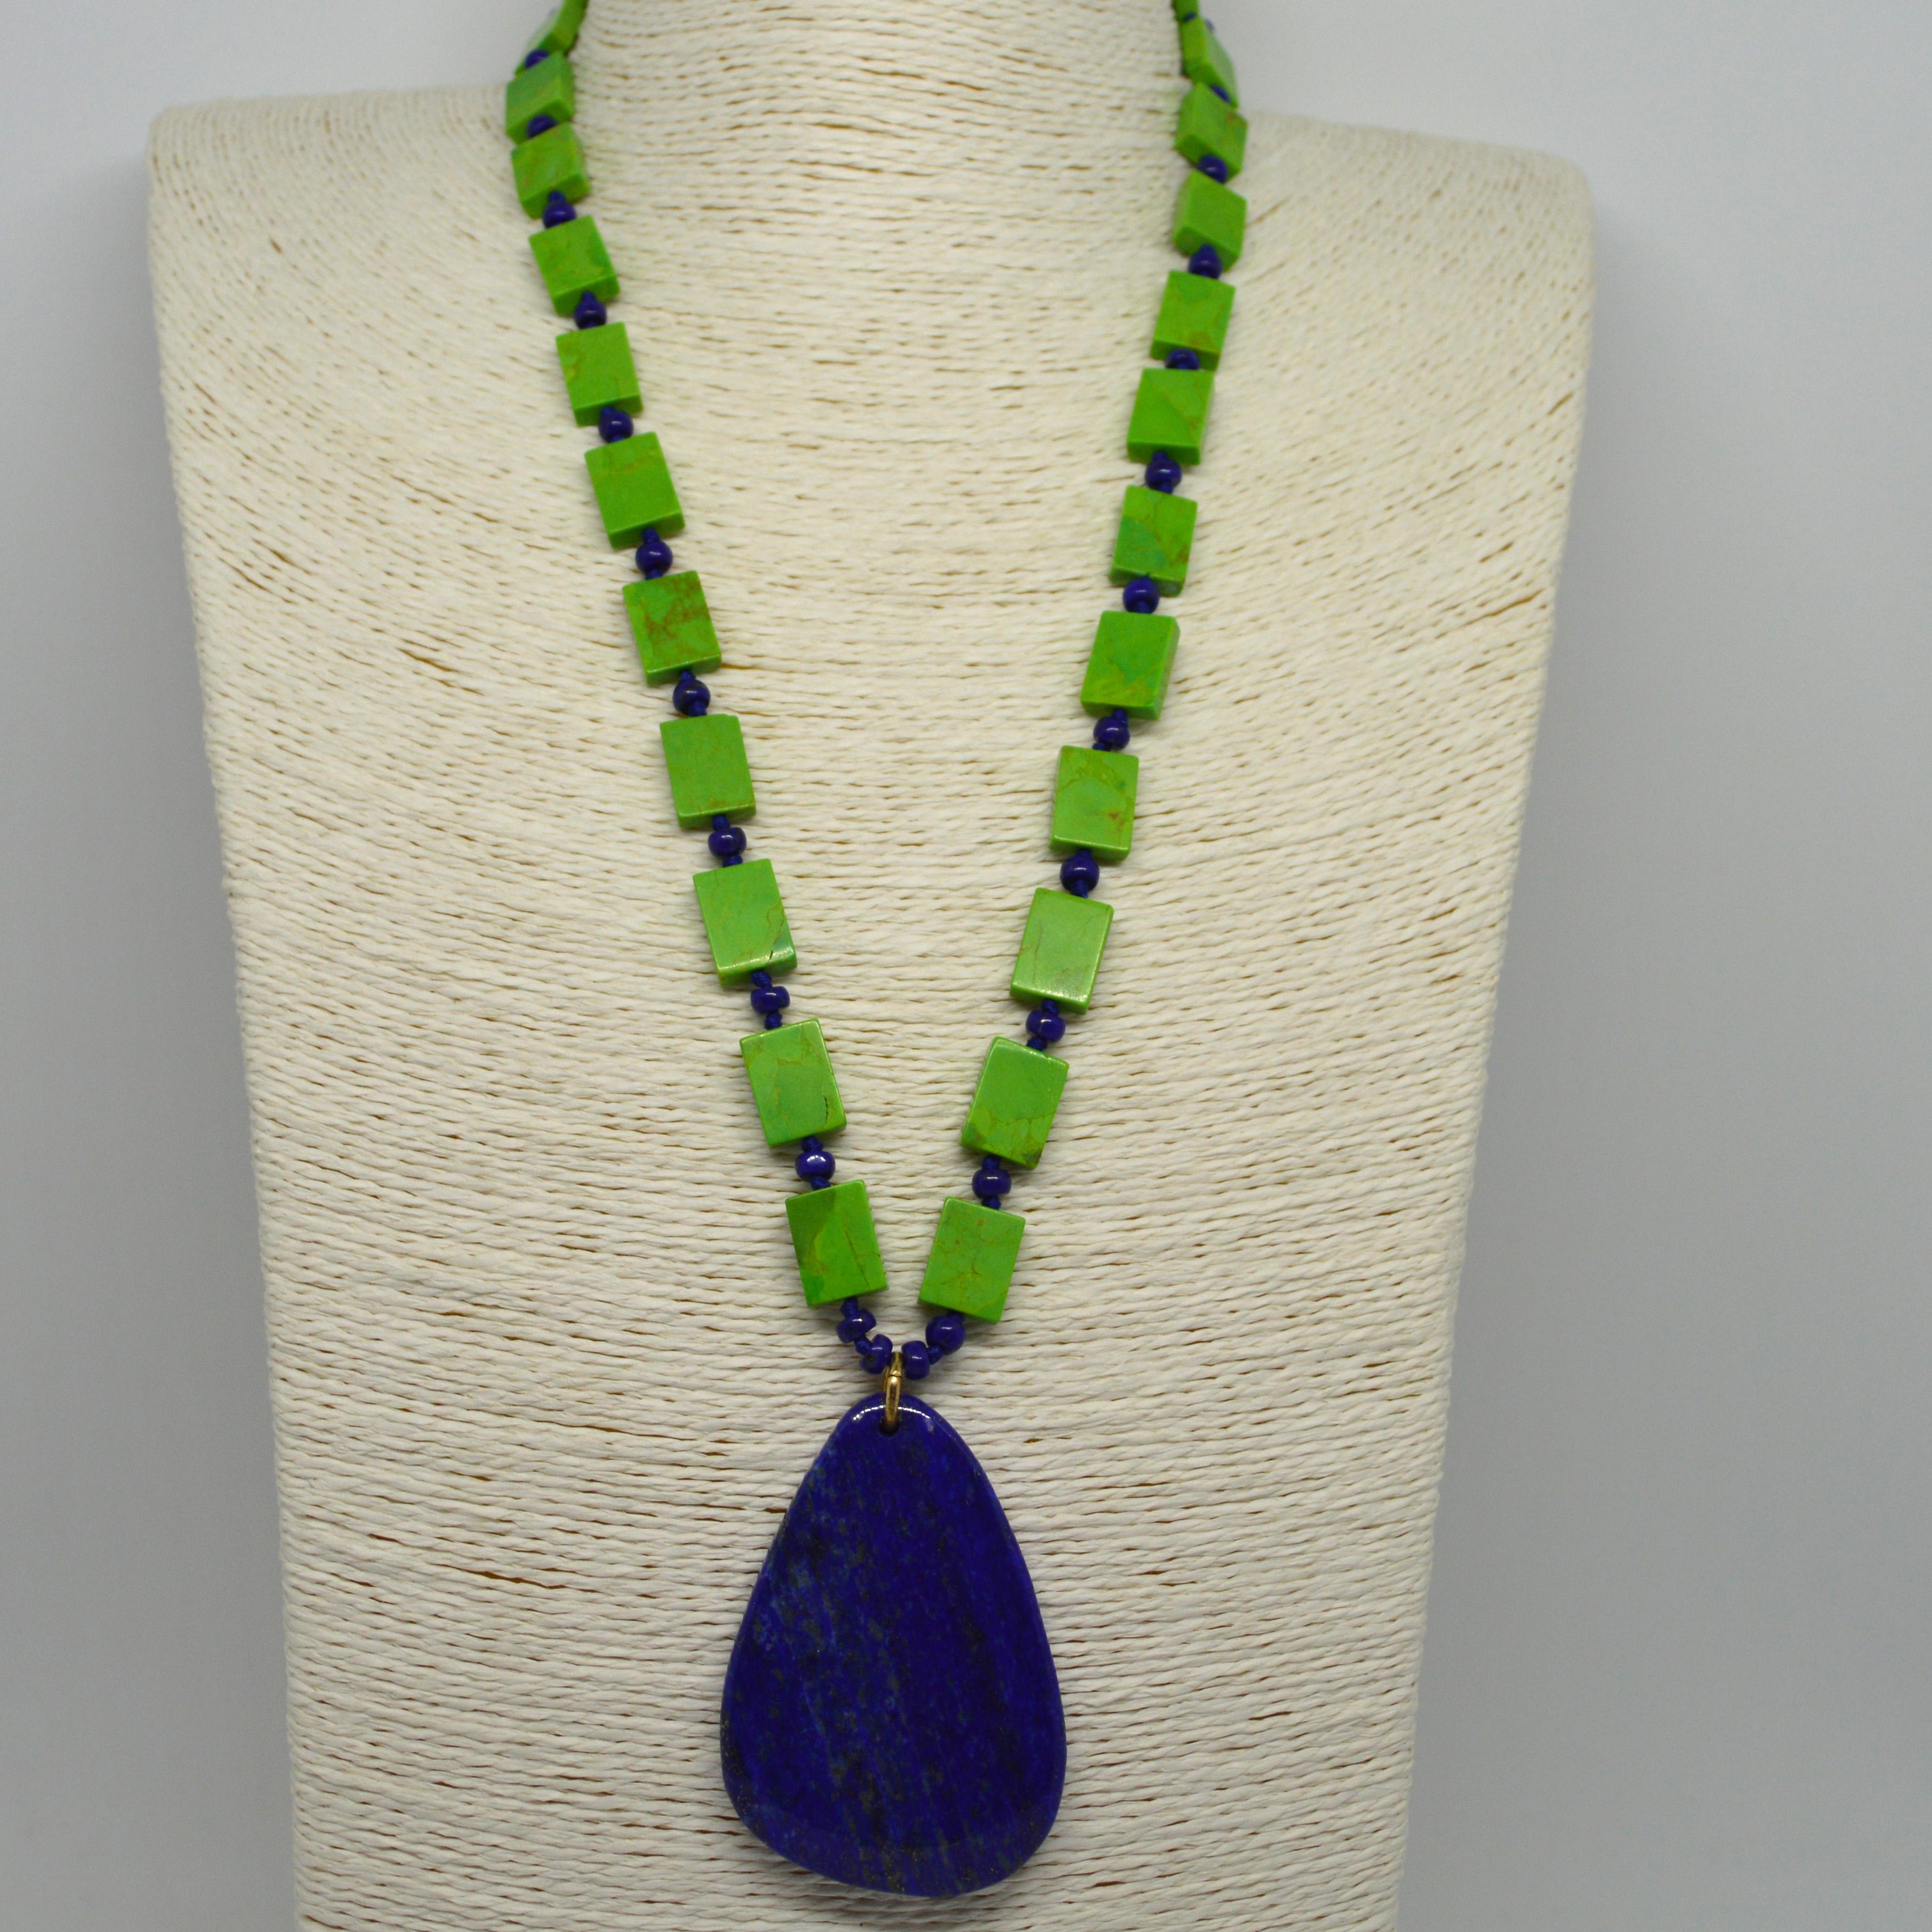 High grade vibrant Lime Green Mojave Turquoise the rarest variety of Natural Turquoise. Necklace is comprised of rectangles of 10x14mm Mojave Green Turquoise spaced by natural 4x5mm Rondel Lapis Lazuli beads, with a large free form Lapis Pendant